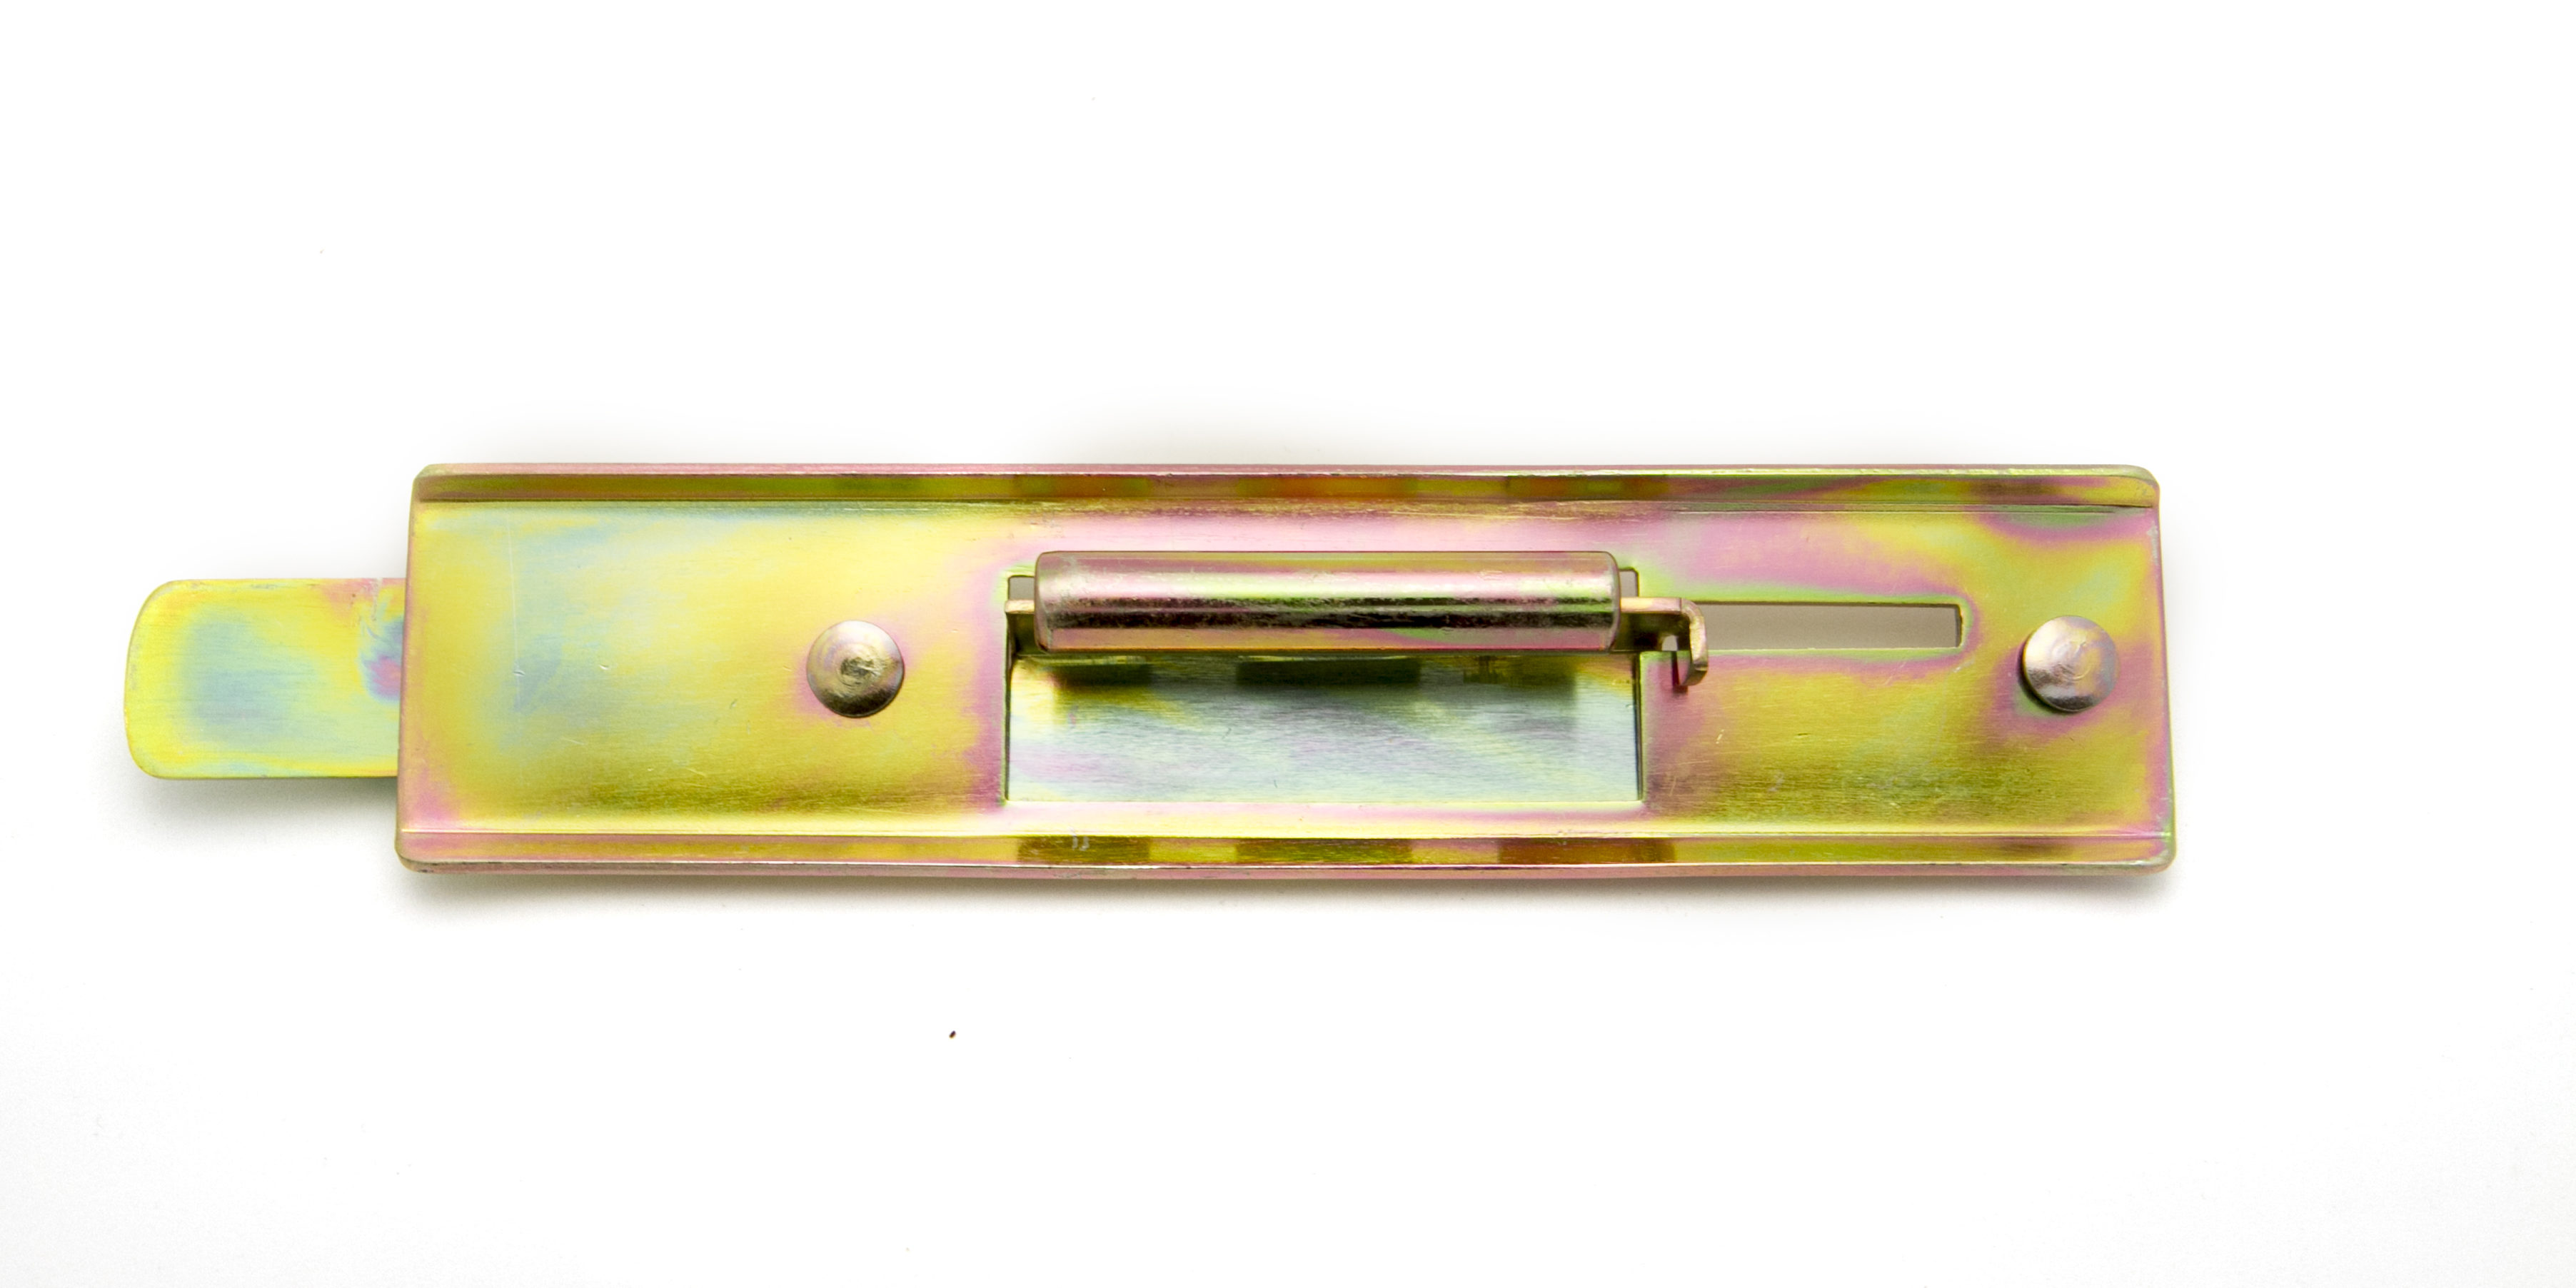 Our Security Hardware includes a full line of Latches and Hasps